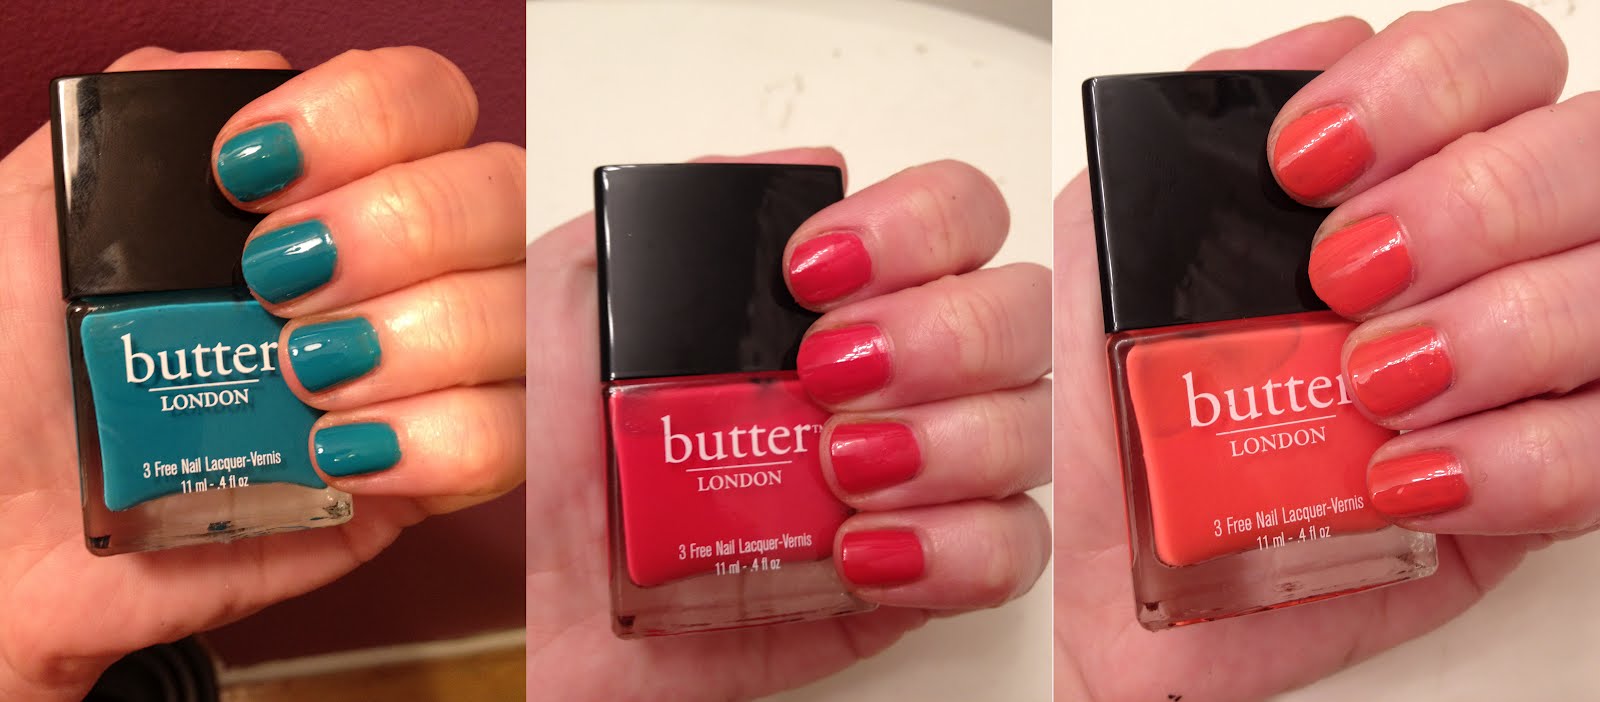 7. Butter London Nail Lacquer in "Jaffa" - wide 4